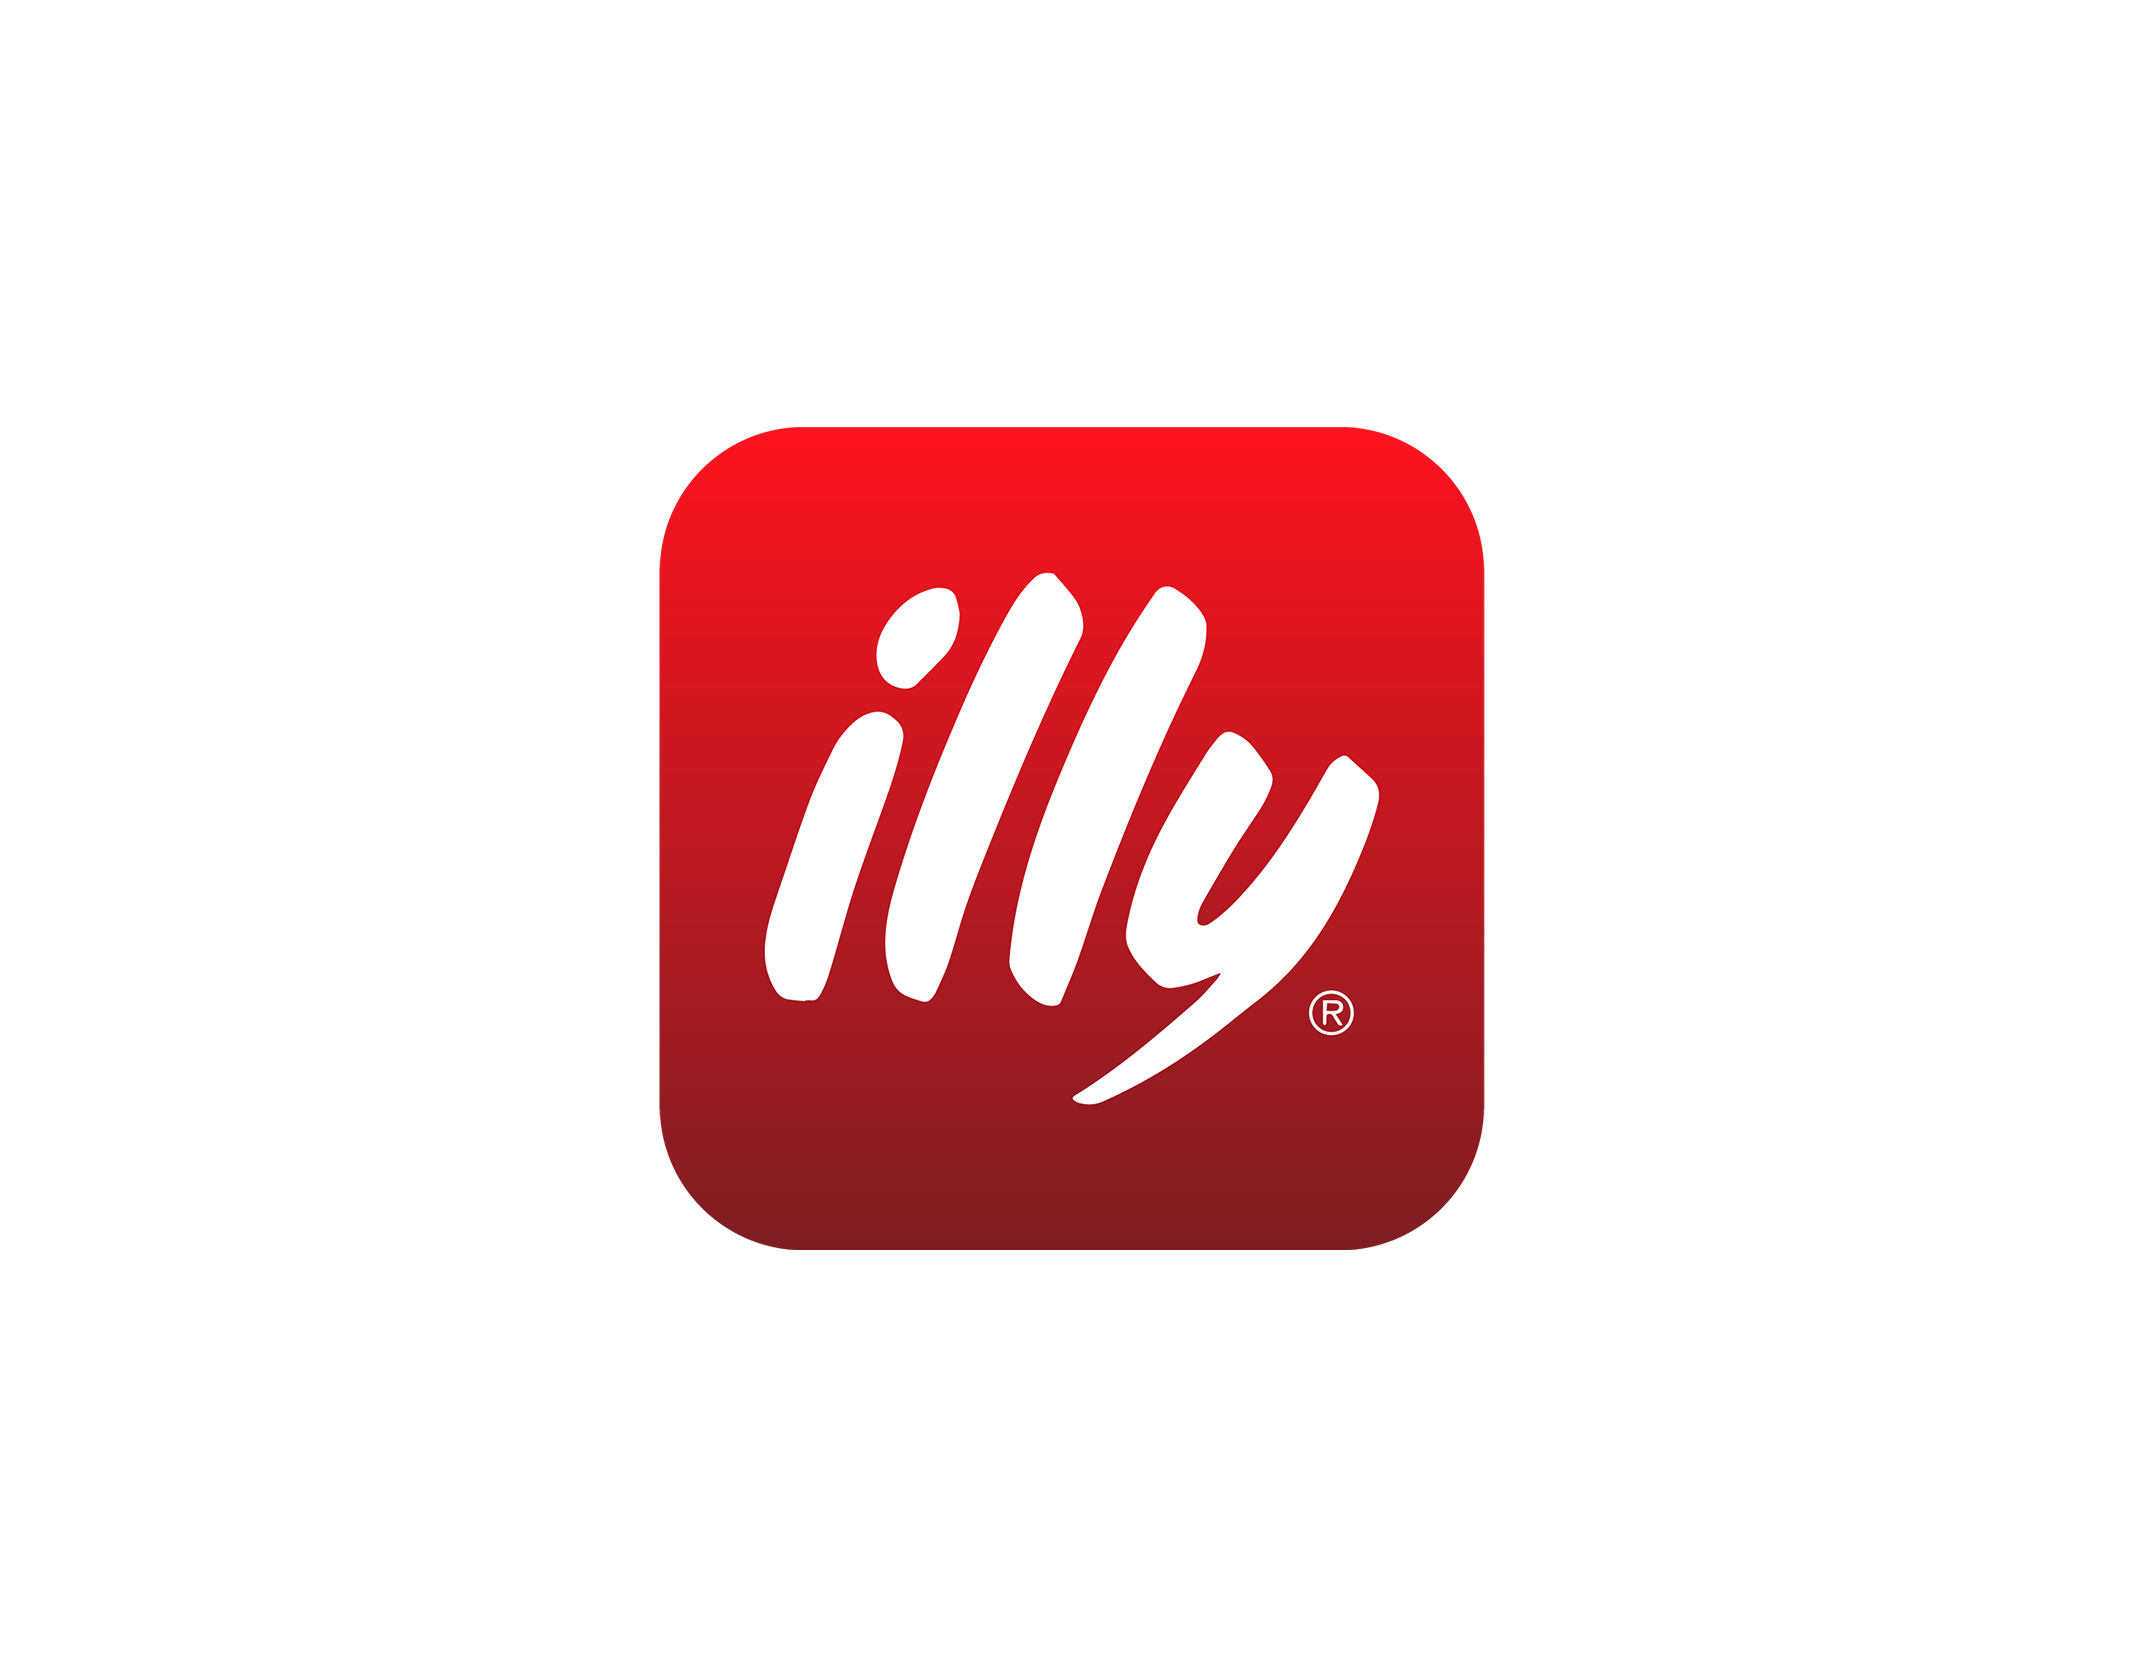 illy Coffee